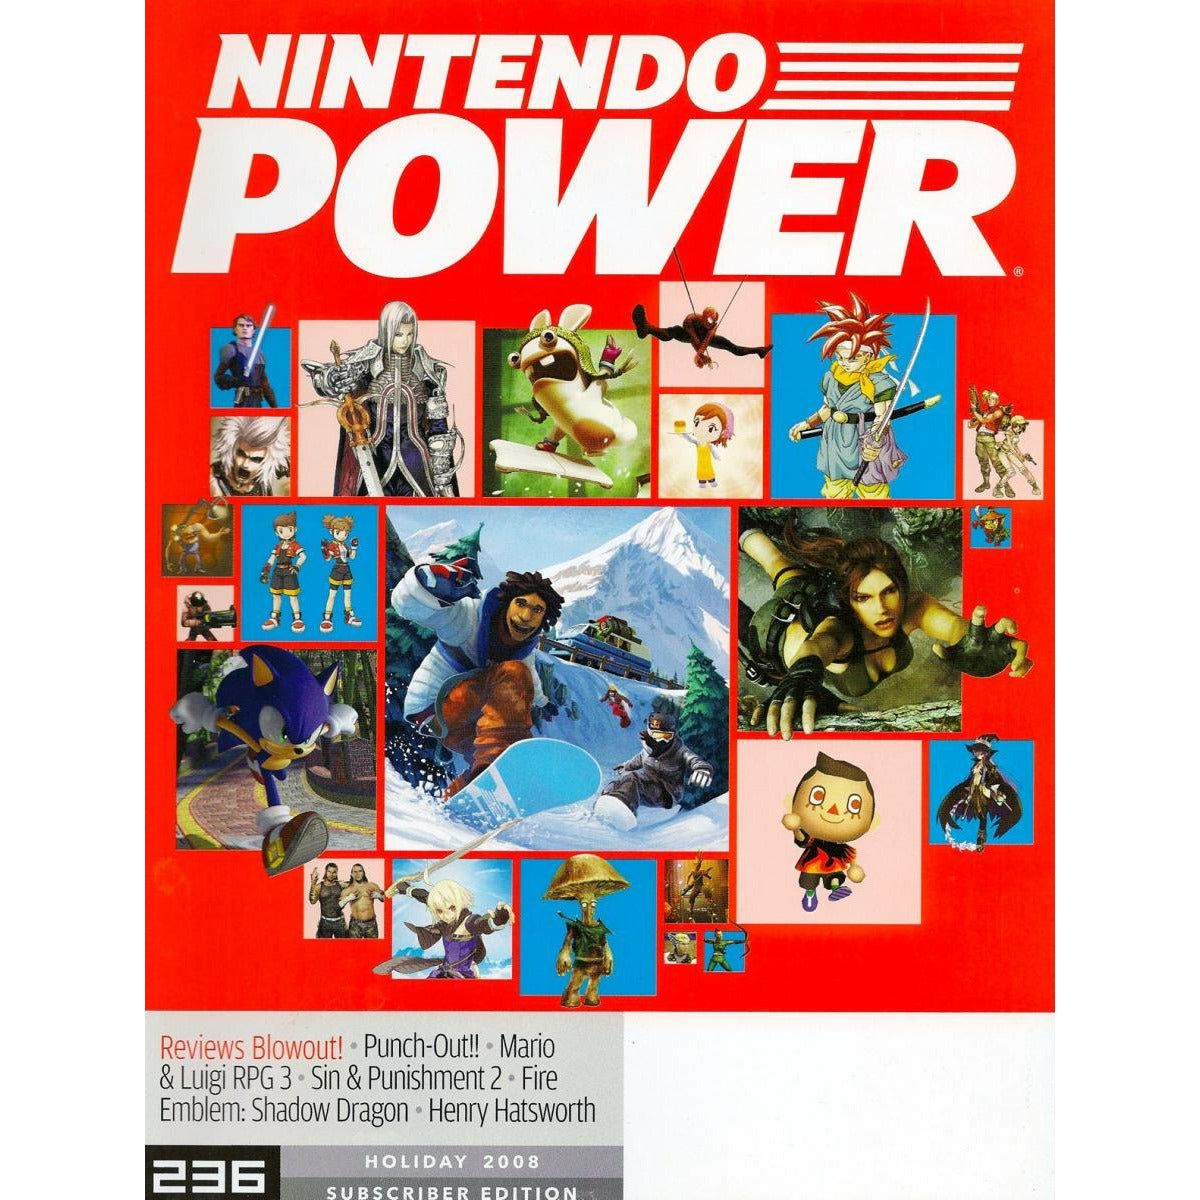 Nintendo Power Magazine (#236 Subscriber Edition) - Complete and/or Good Condition